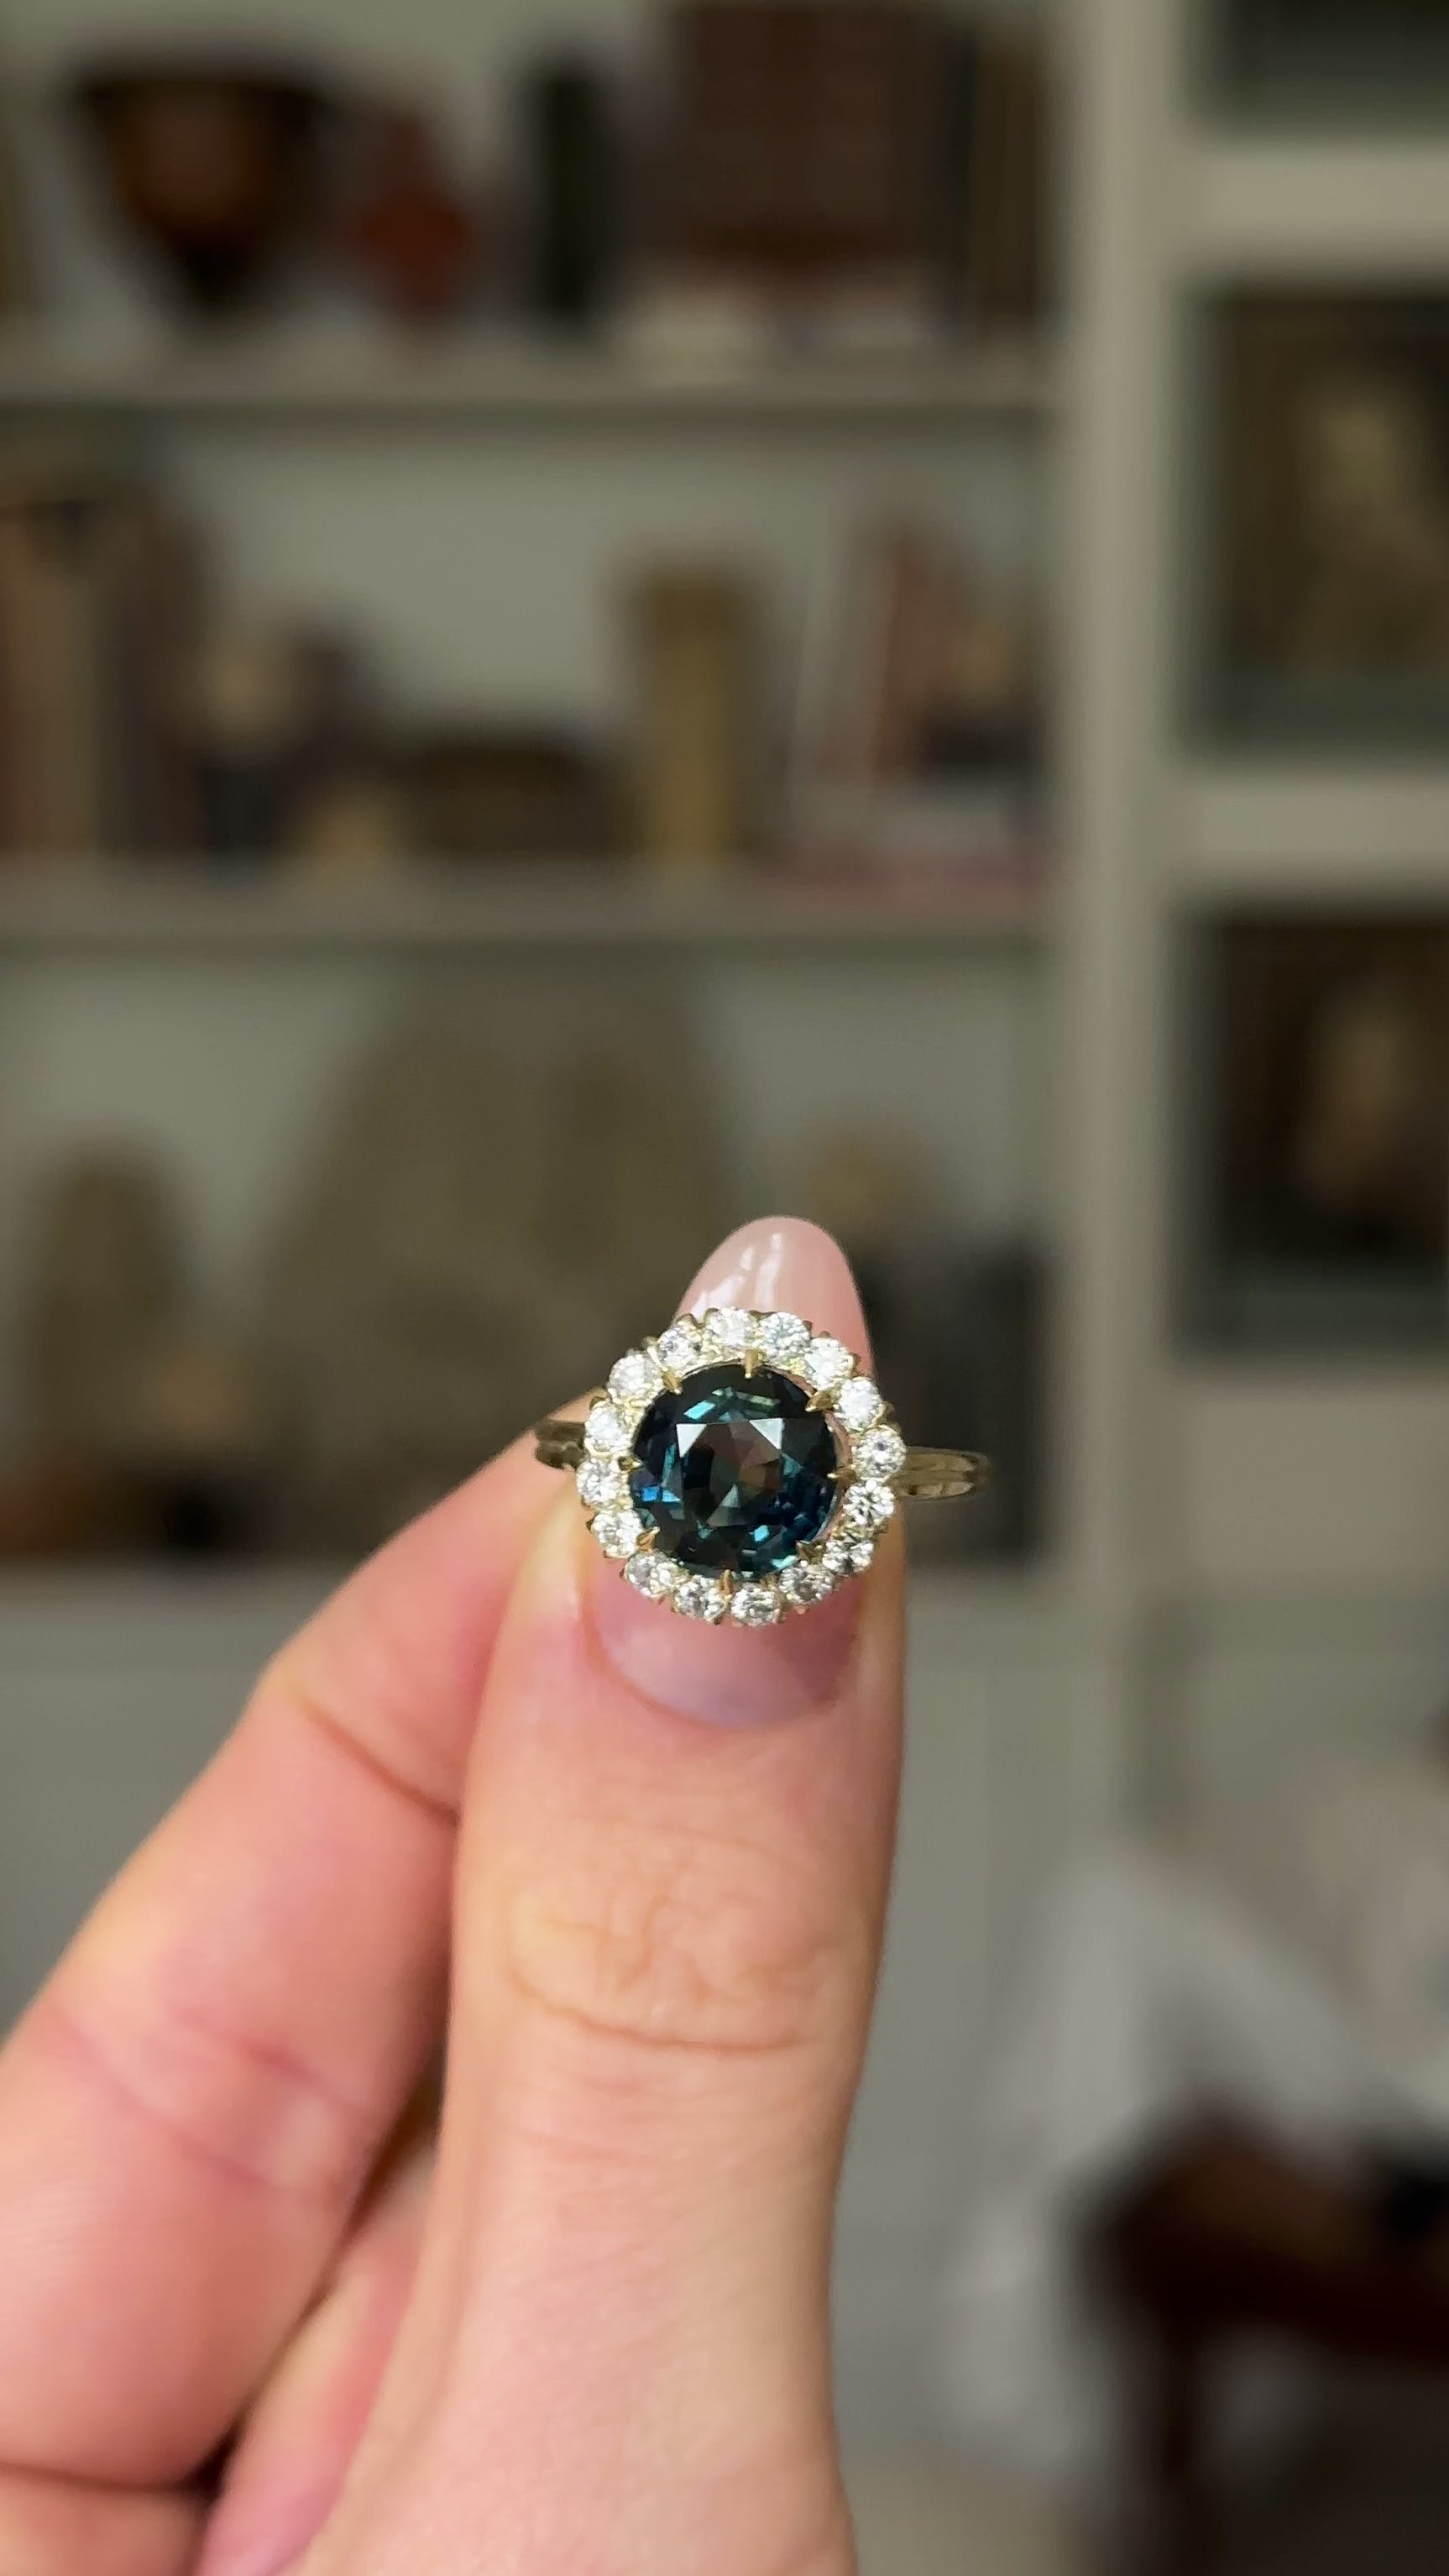 Antique, Teal Blue Sapphire and Diamond Cluster Ring, 18ct Yellow Gold held in fingers and rotated to give perspective.